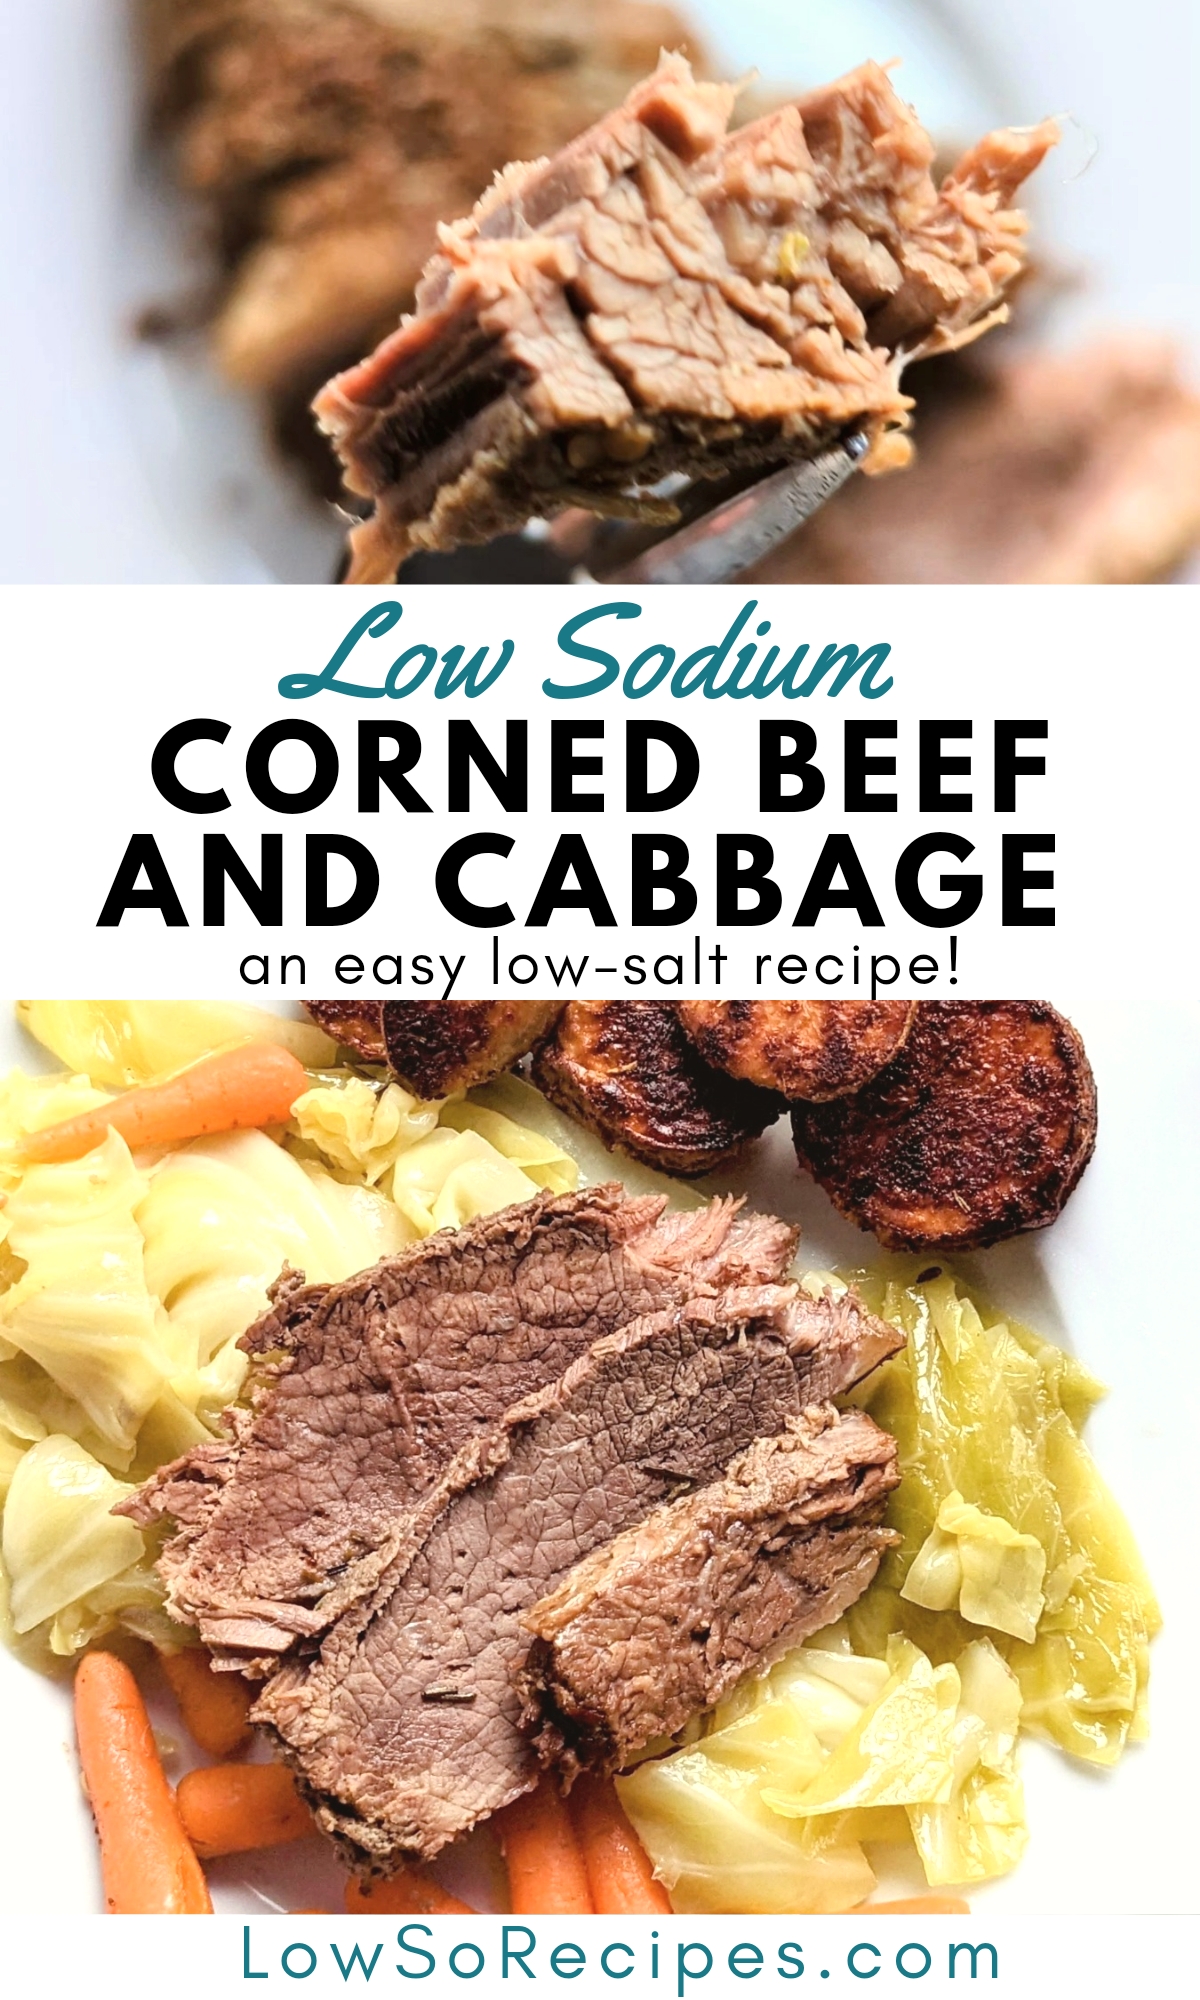 low sodium corned beef and cabbage recipe no salt added healthy brisket recipes without salt